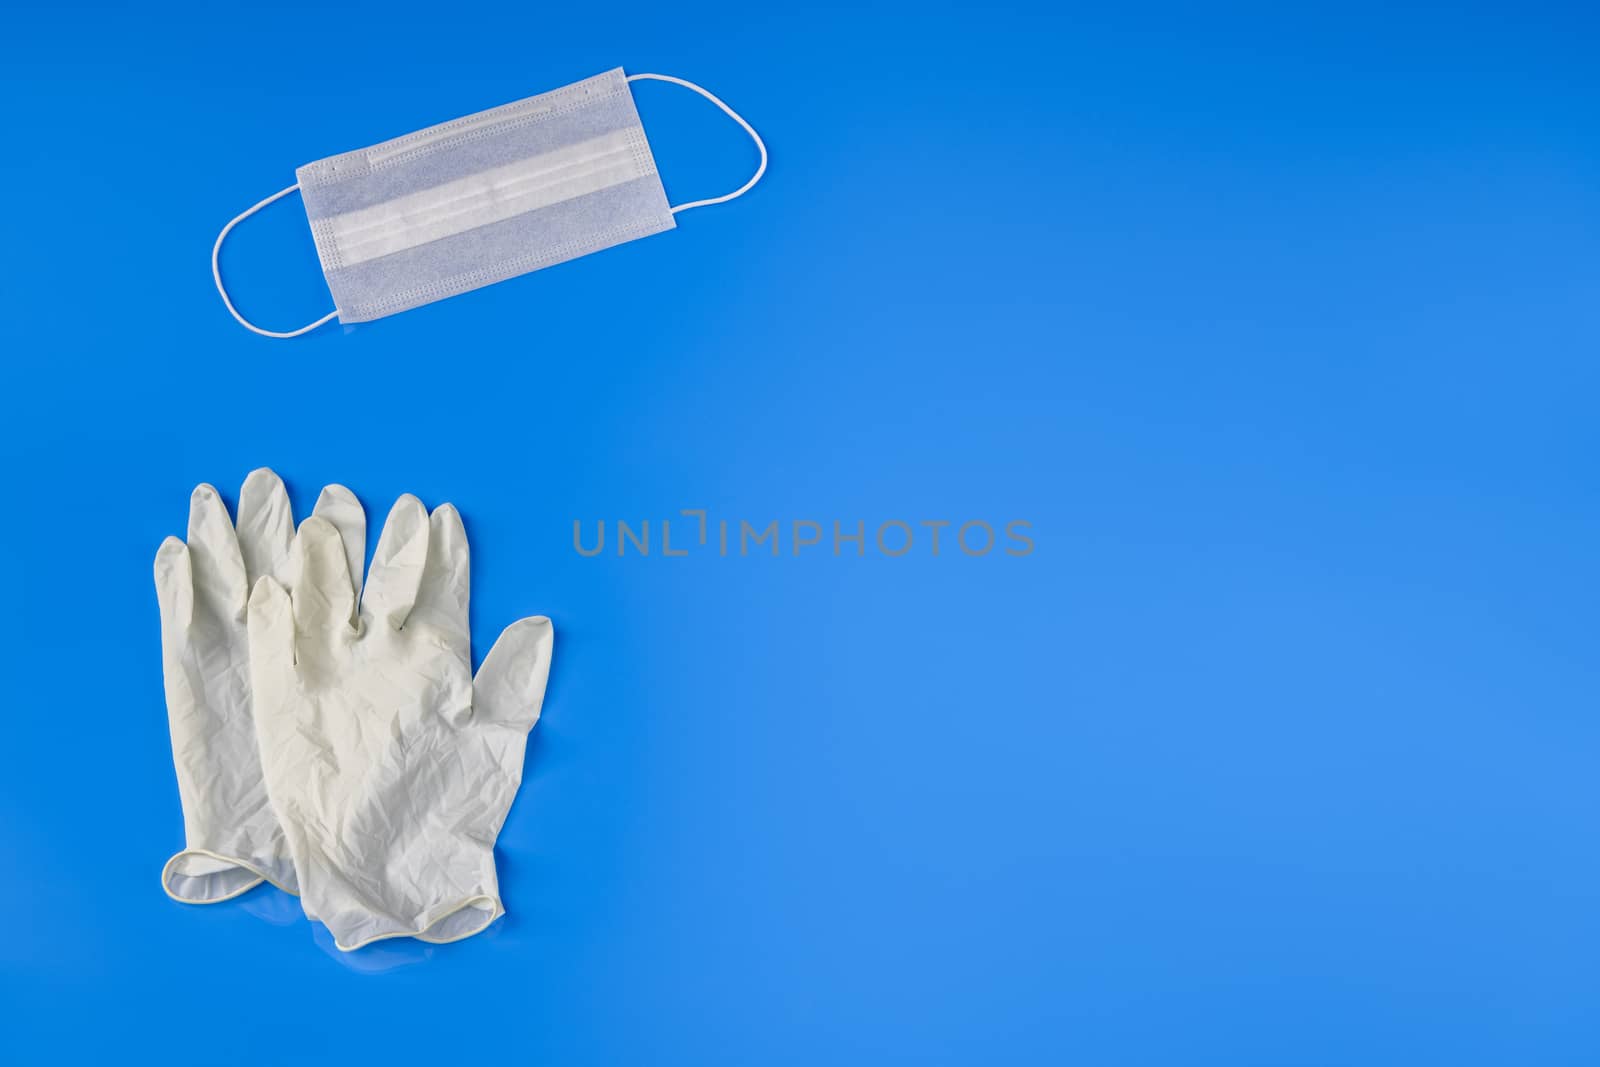 Personal Protective Equipment (PPE) kit against coronavirus with face mask, set of gloves against blue background with copy space for title or text.